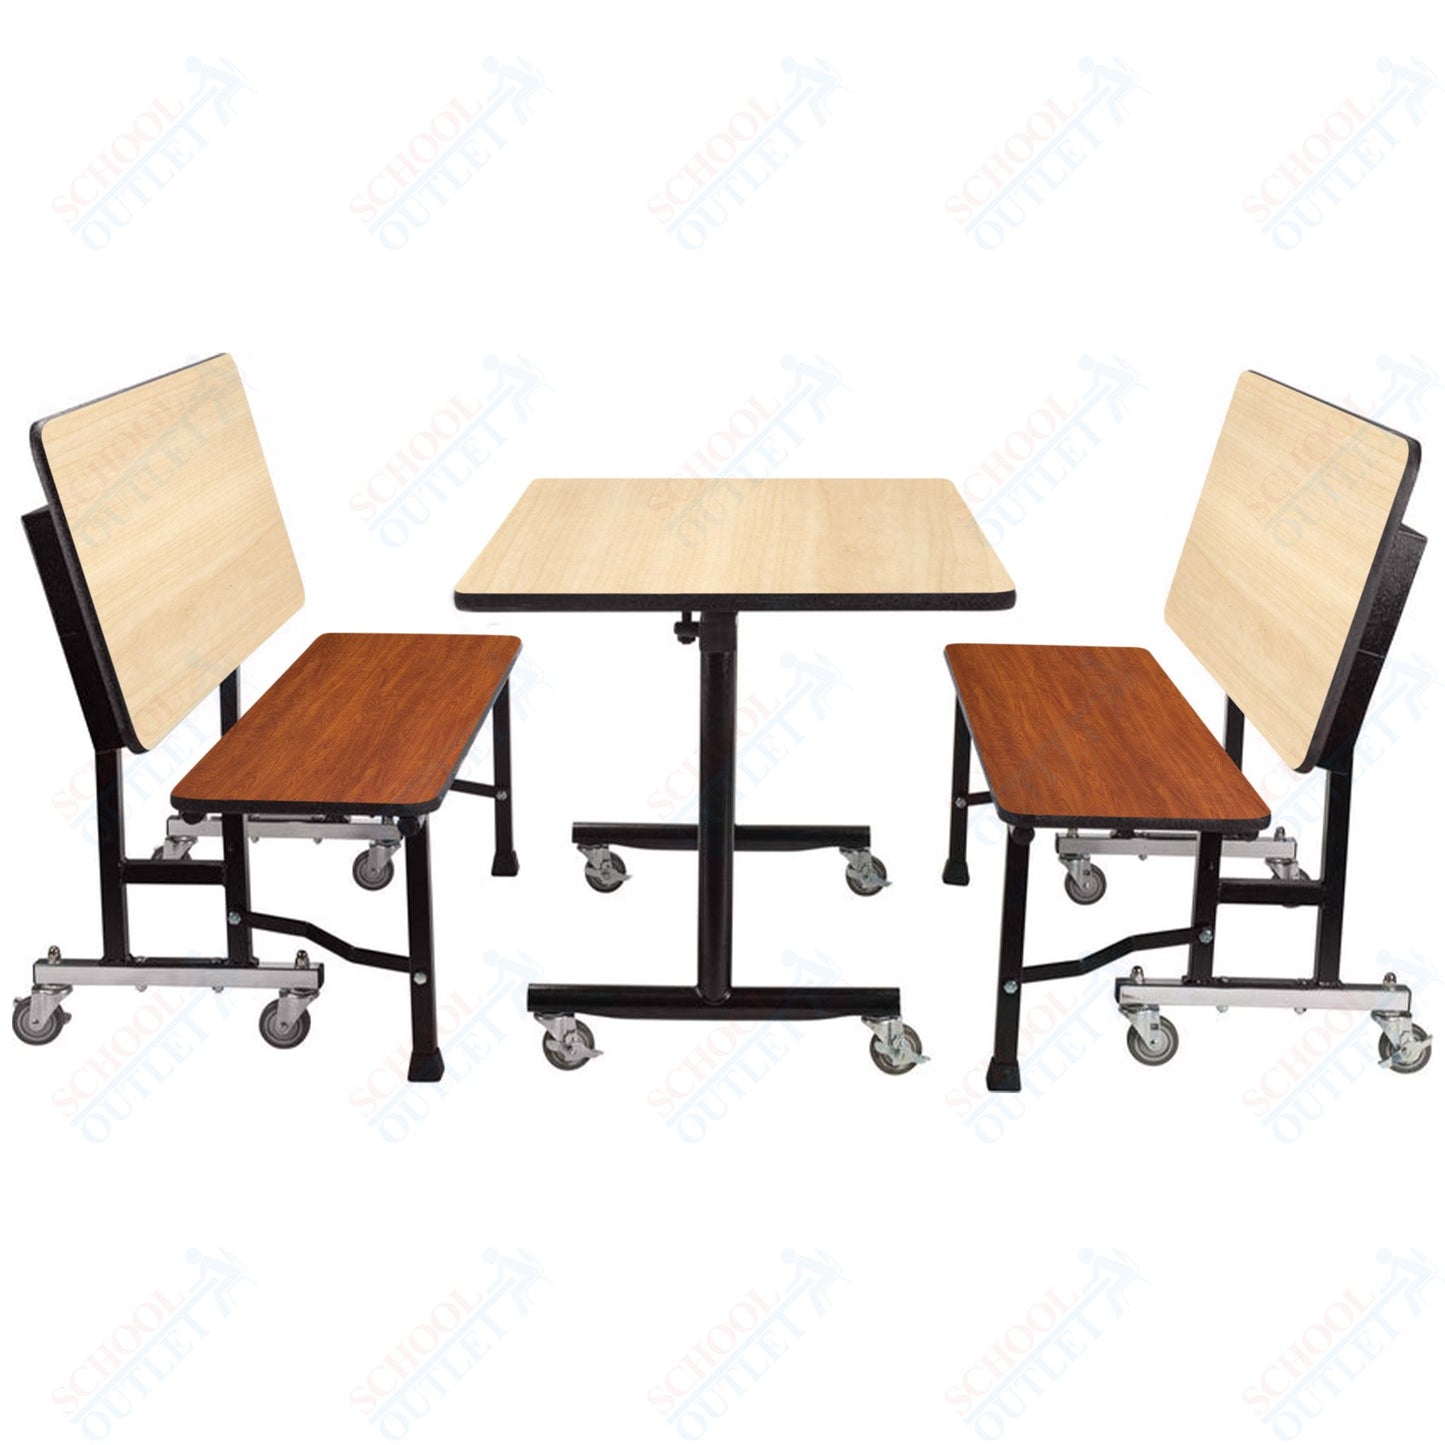 NPS ToGo Booth Set, (1) 30"x60" Table and (2) 60" Benches, MDF Core (National Public Seating NPS-TGBTH3060MDPE)